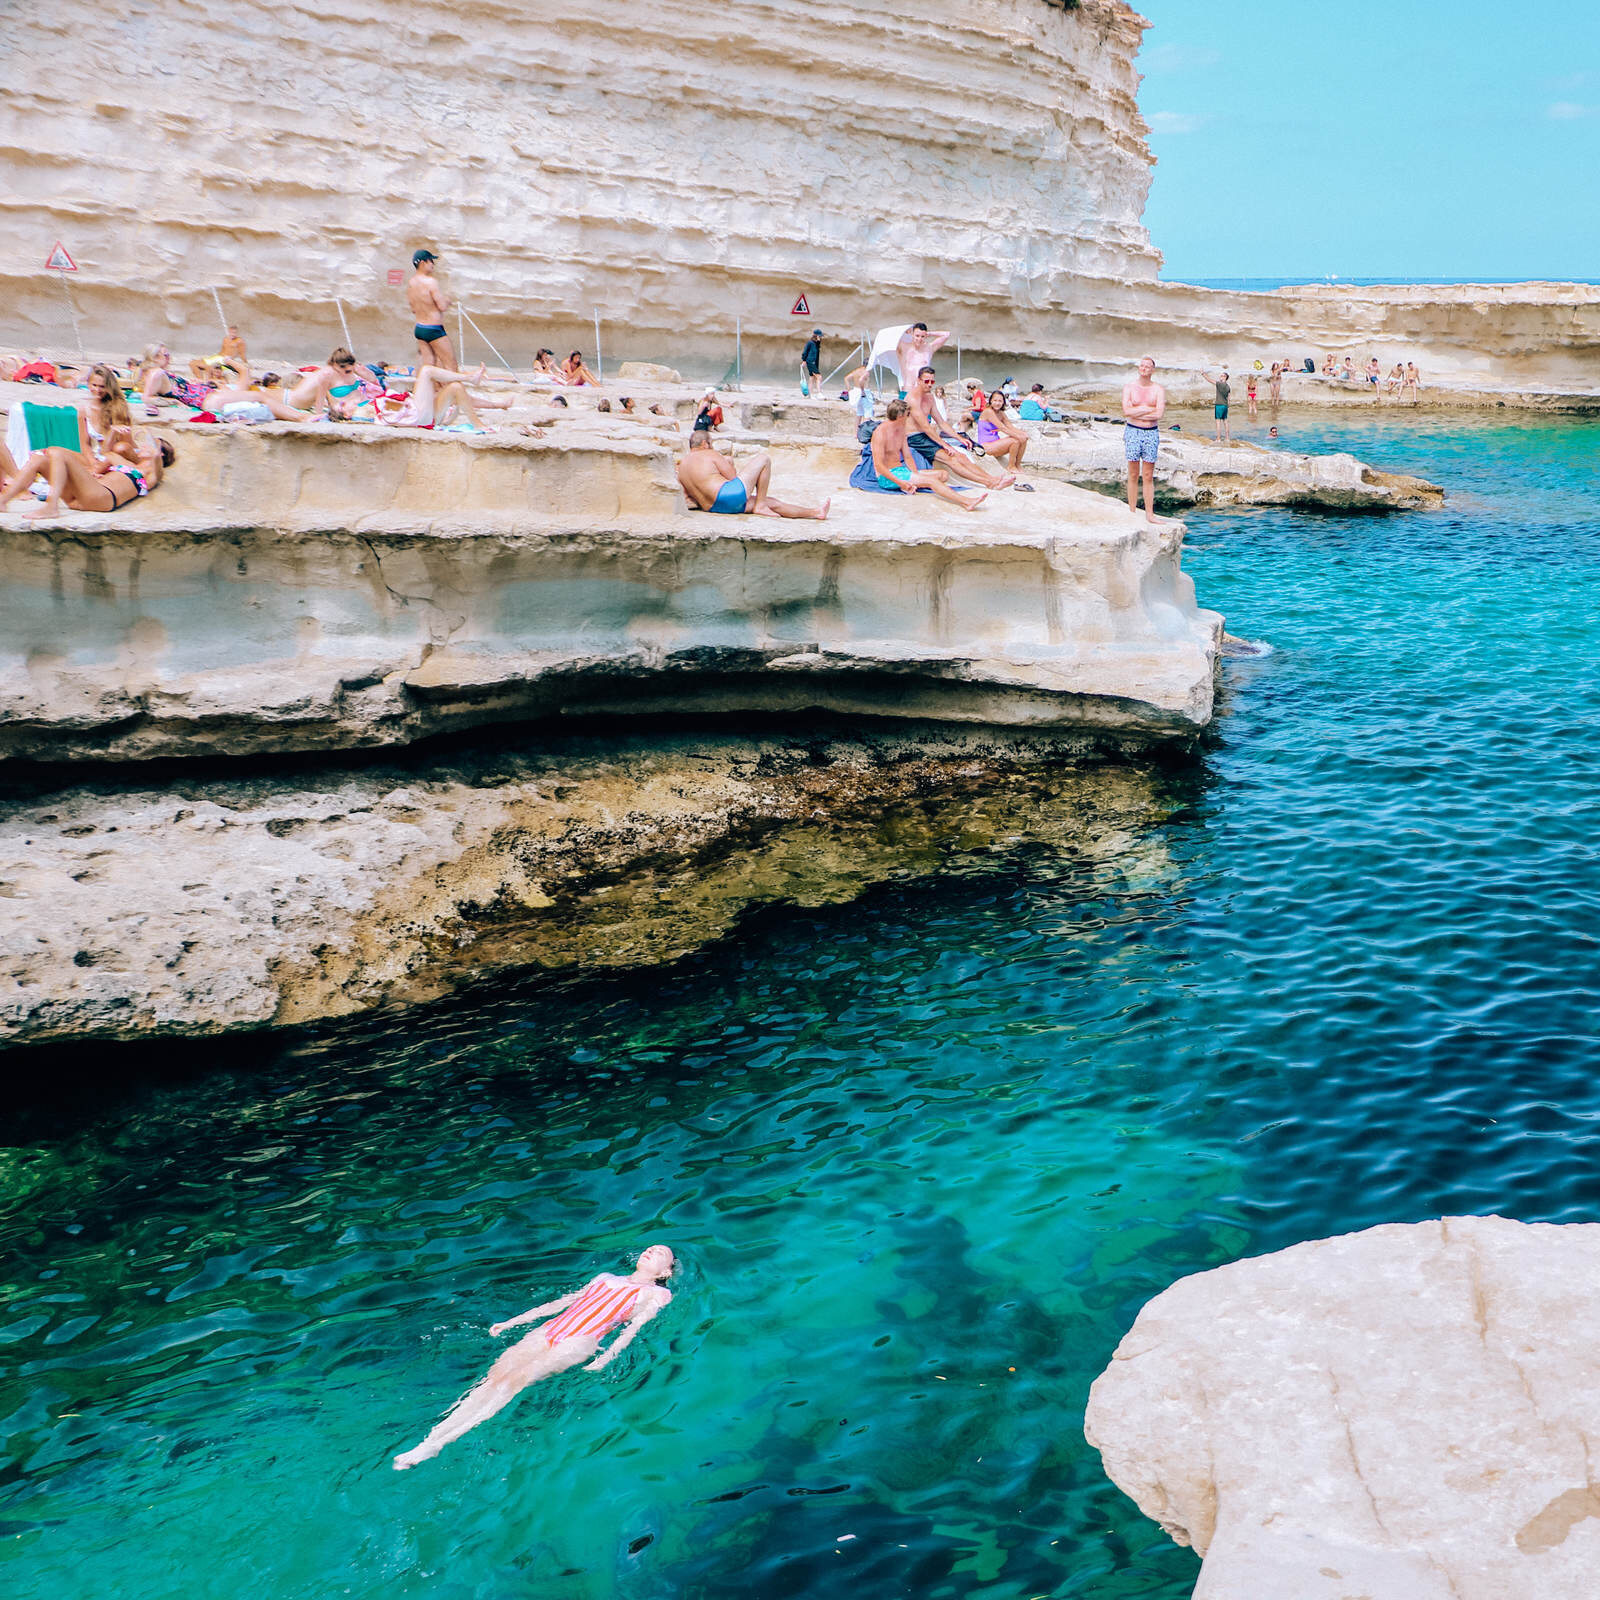 Helea floating in the blue waters of St Peter’s Pool, Malta surrounded by white rocky cliffs